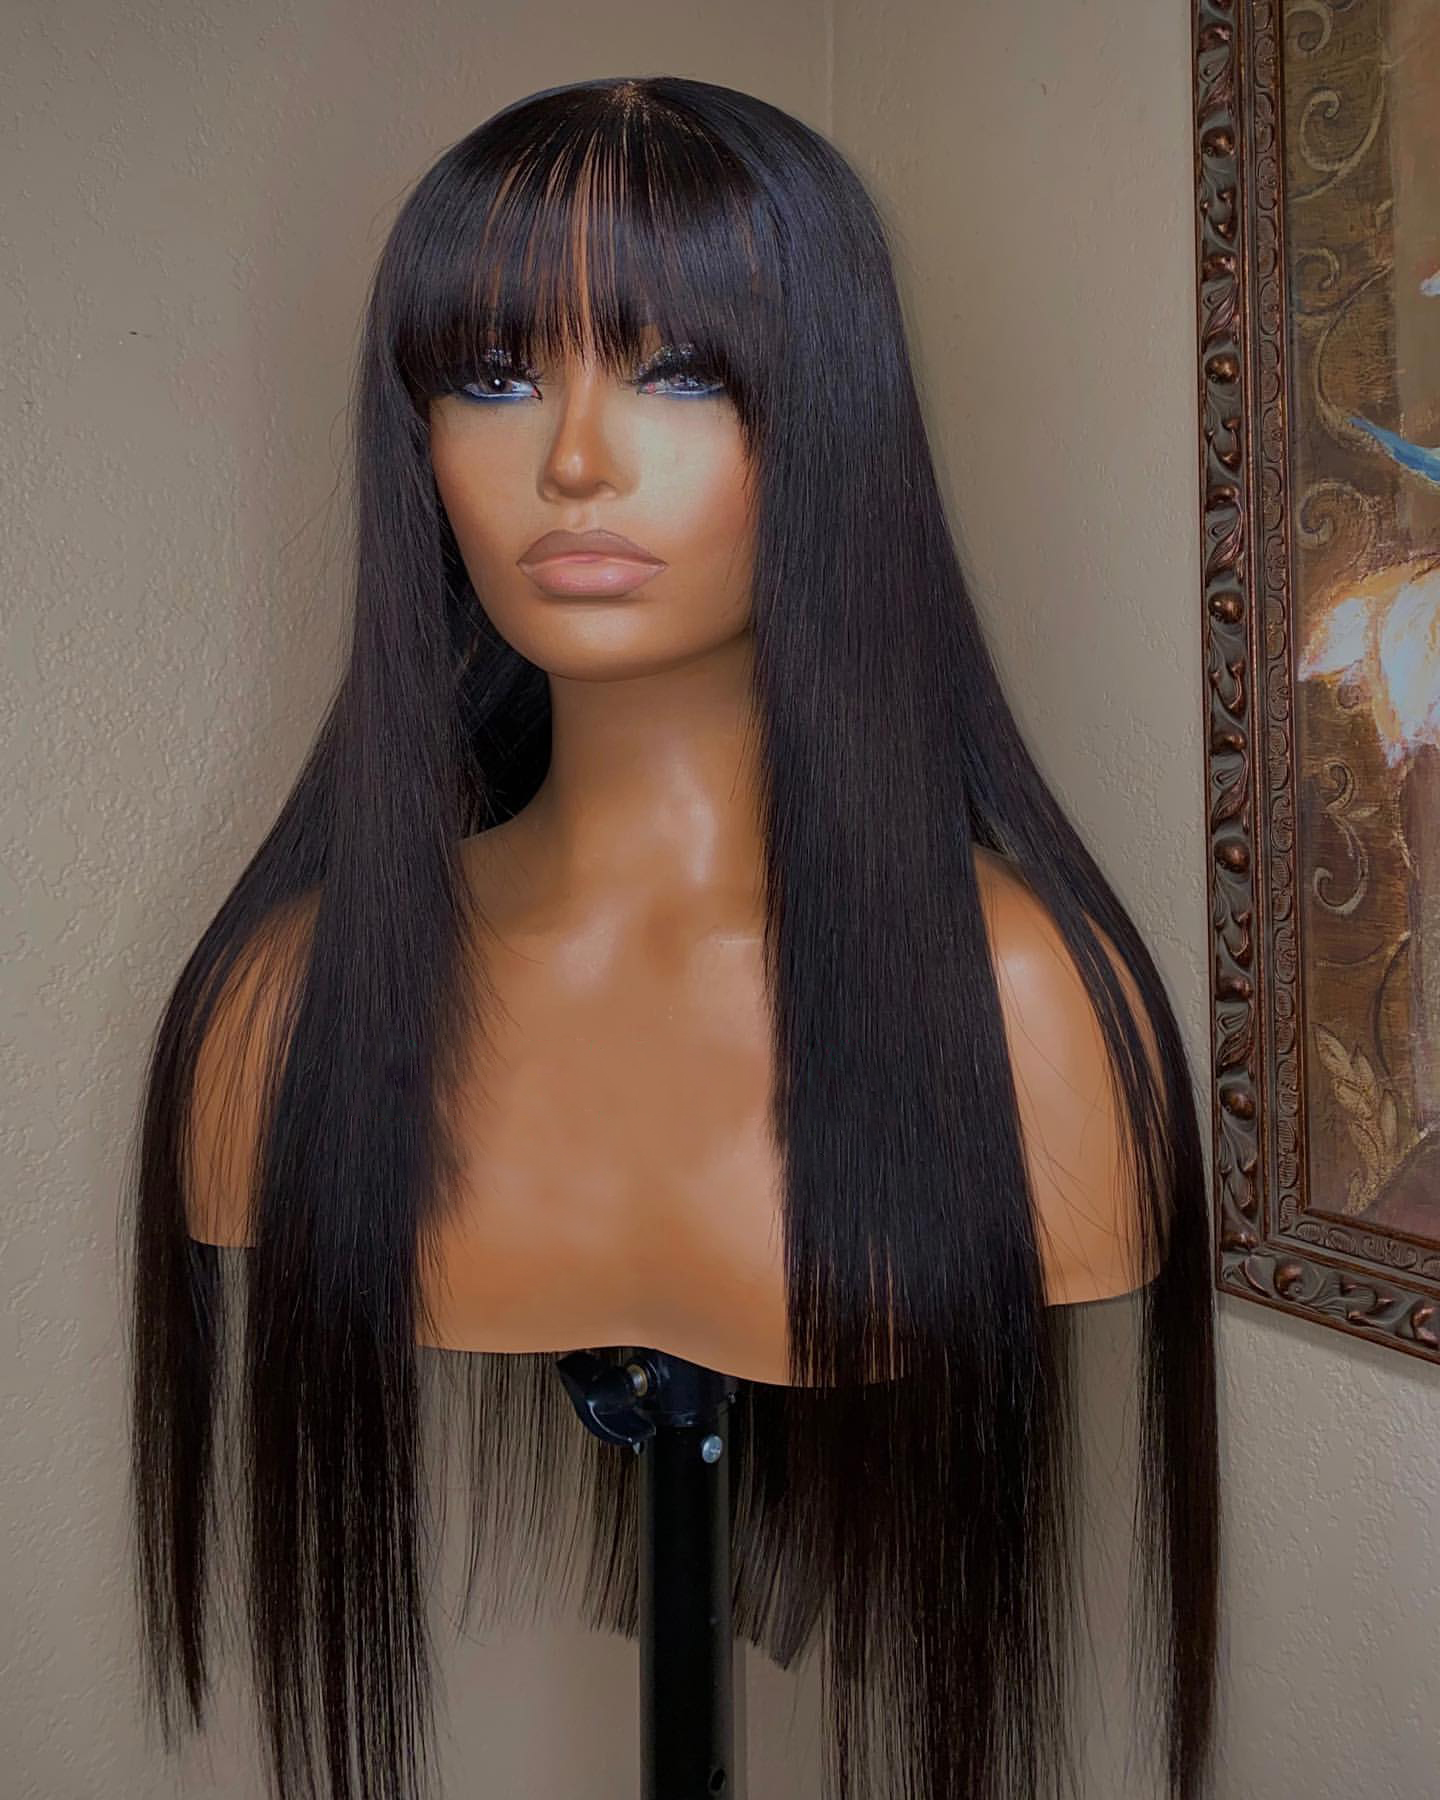 

Brazilian Hair Straight Wig With Bangs Fringe Bob Human Hair Wig For Women Glueless None Full Lace Wig Synthetic Heat Resistant, Wig cap